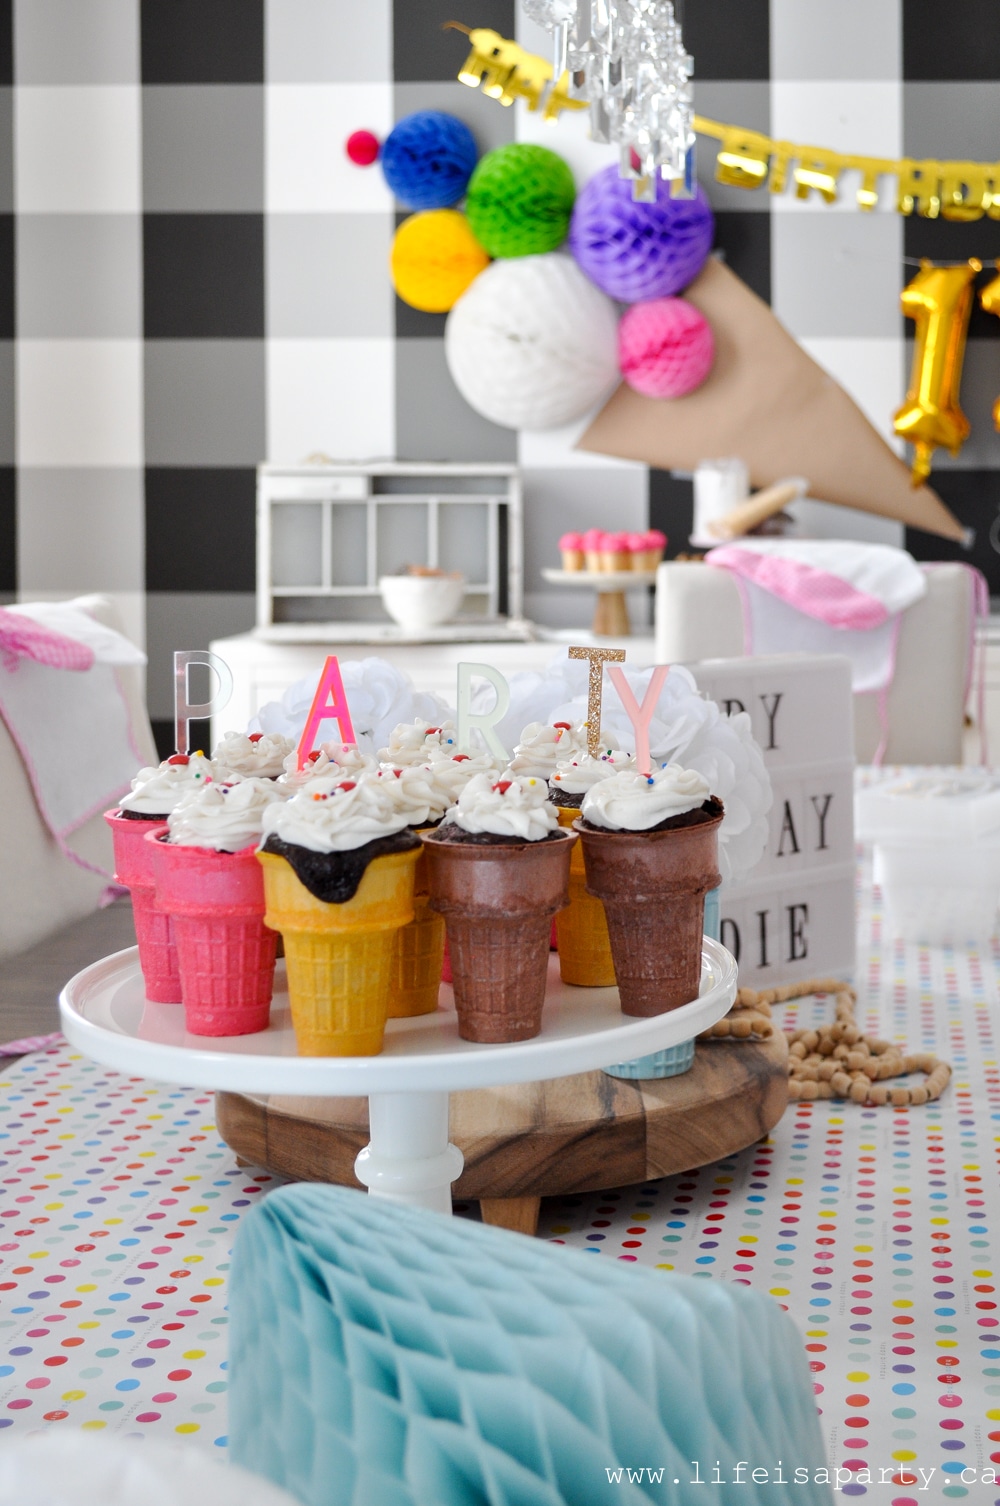 Ice Cream Themed Party Decorations: easy, DIY, inexpensive and colourful ice cream decoations like our ice cream cone dessert table backdrop, and ice cream cone bunting.